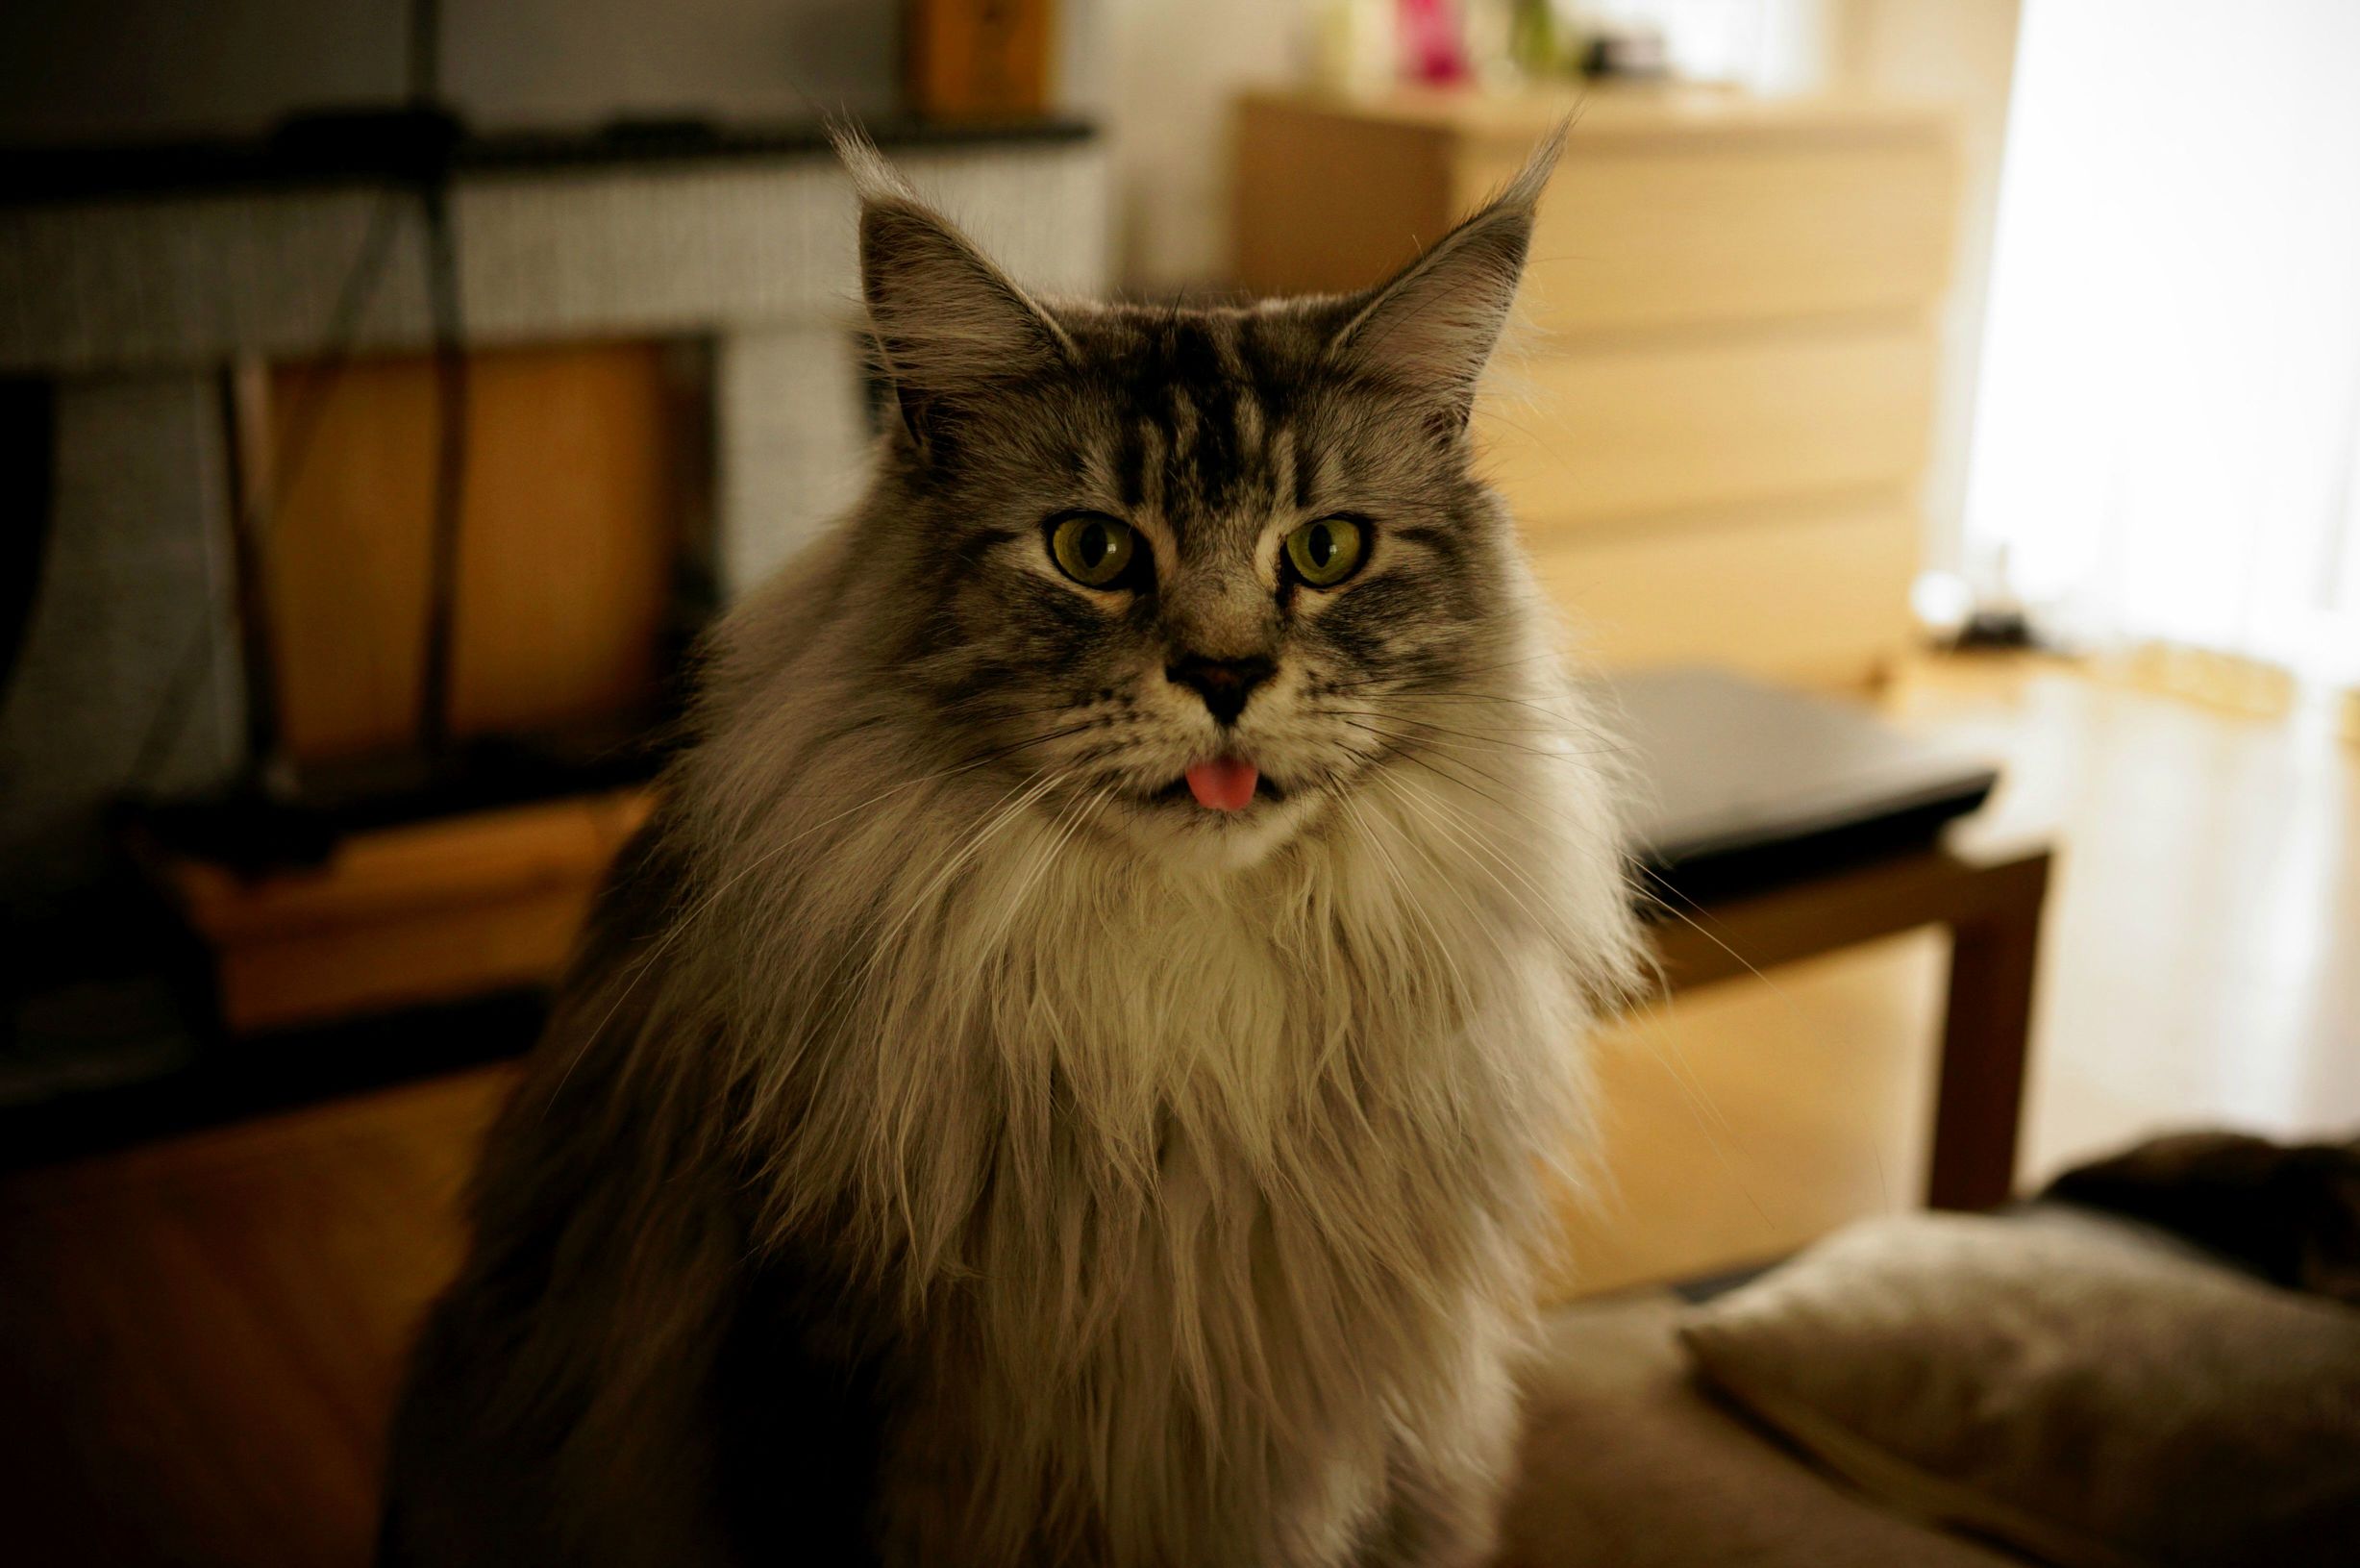 My derpy and adorable maine coon zoom for kitty pleasure